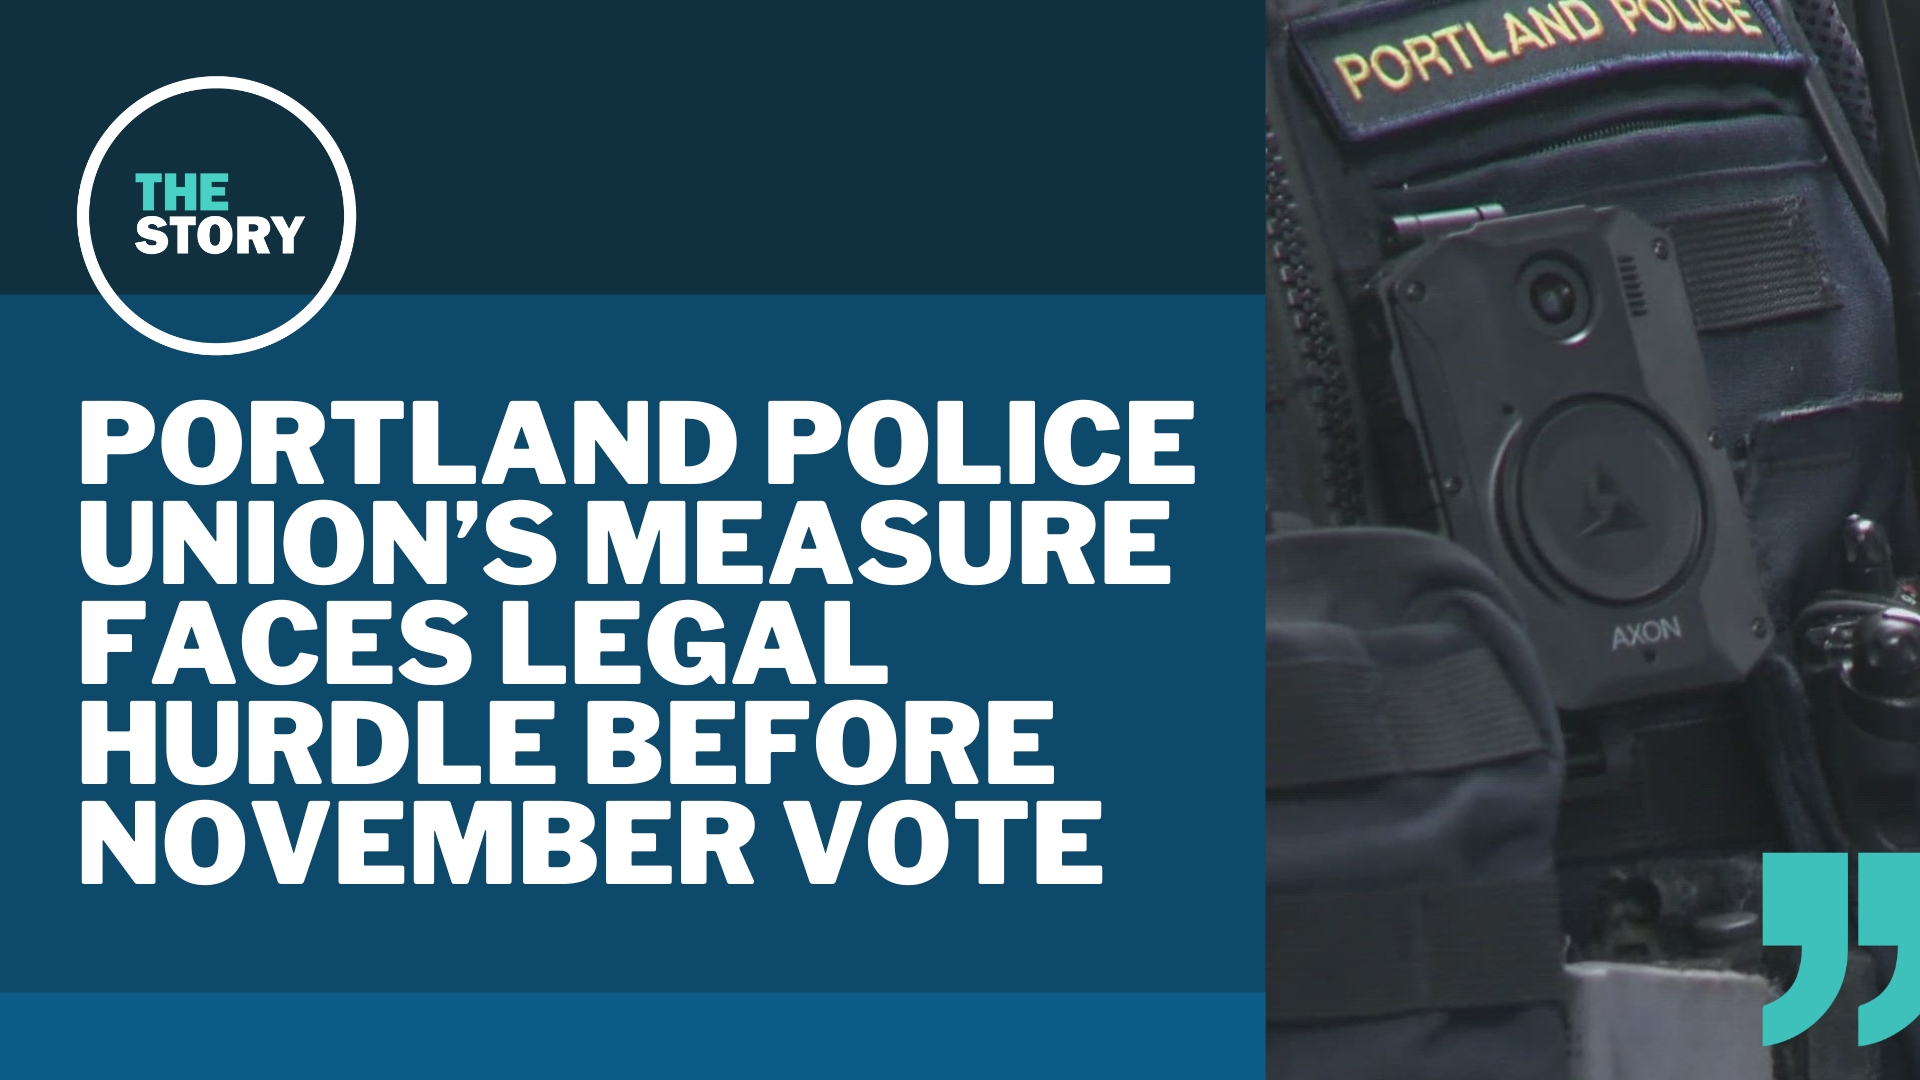 In 2020, Portland voters overwhelmingly passed a measure for a new police oversight system. The police union's new measure would weaken some of its authority.